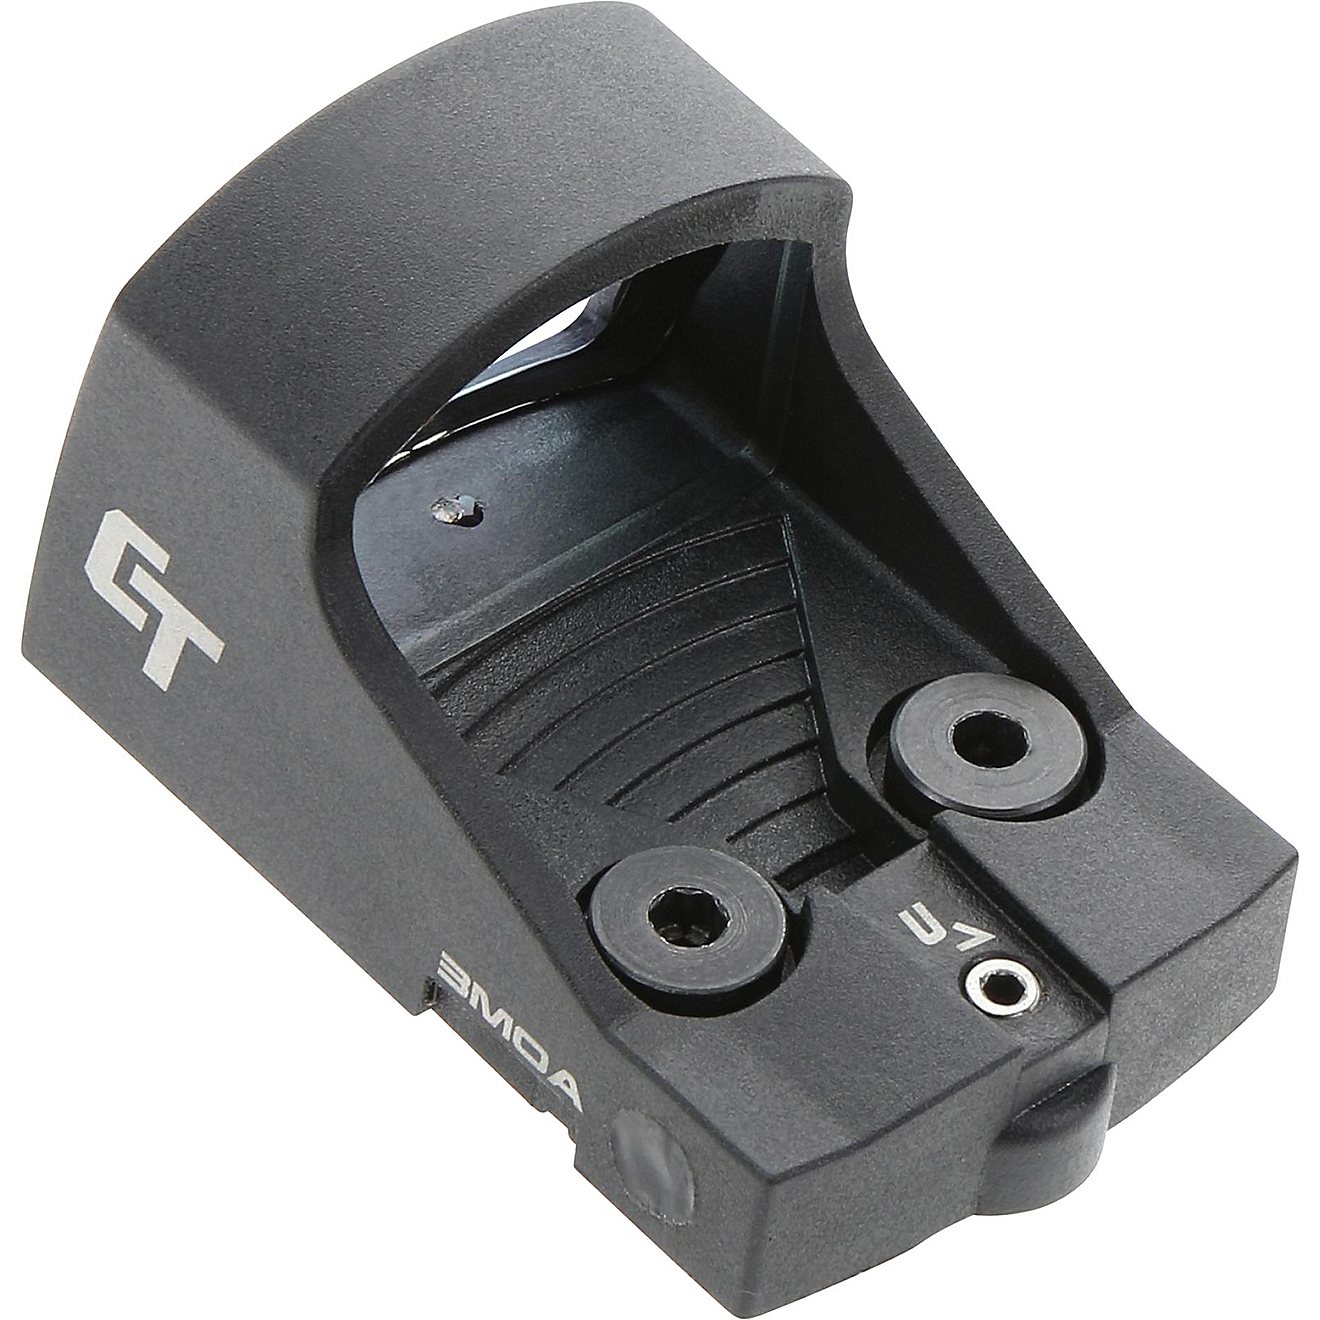 Crimson Trace CTS-1550 Ultra Compact Open Reflex Sight                                                                           - view number 4